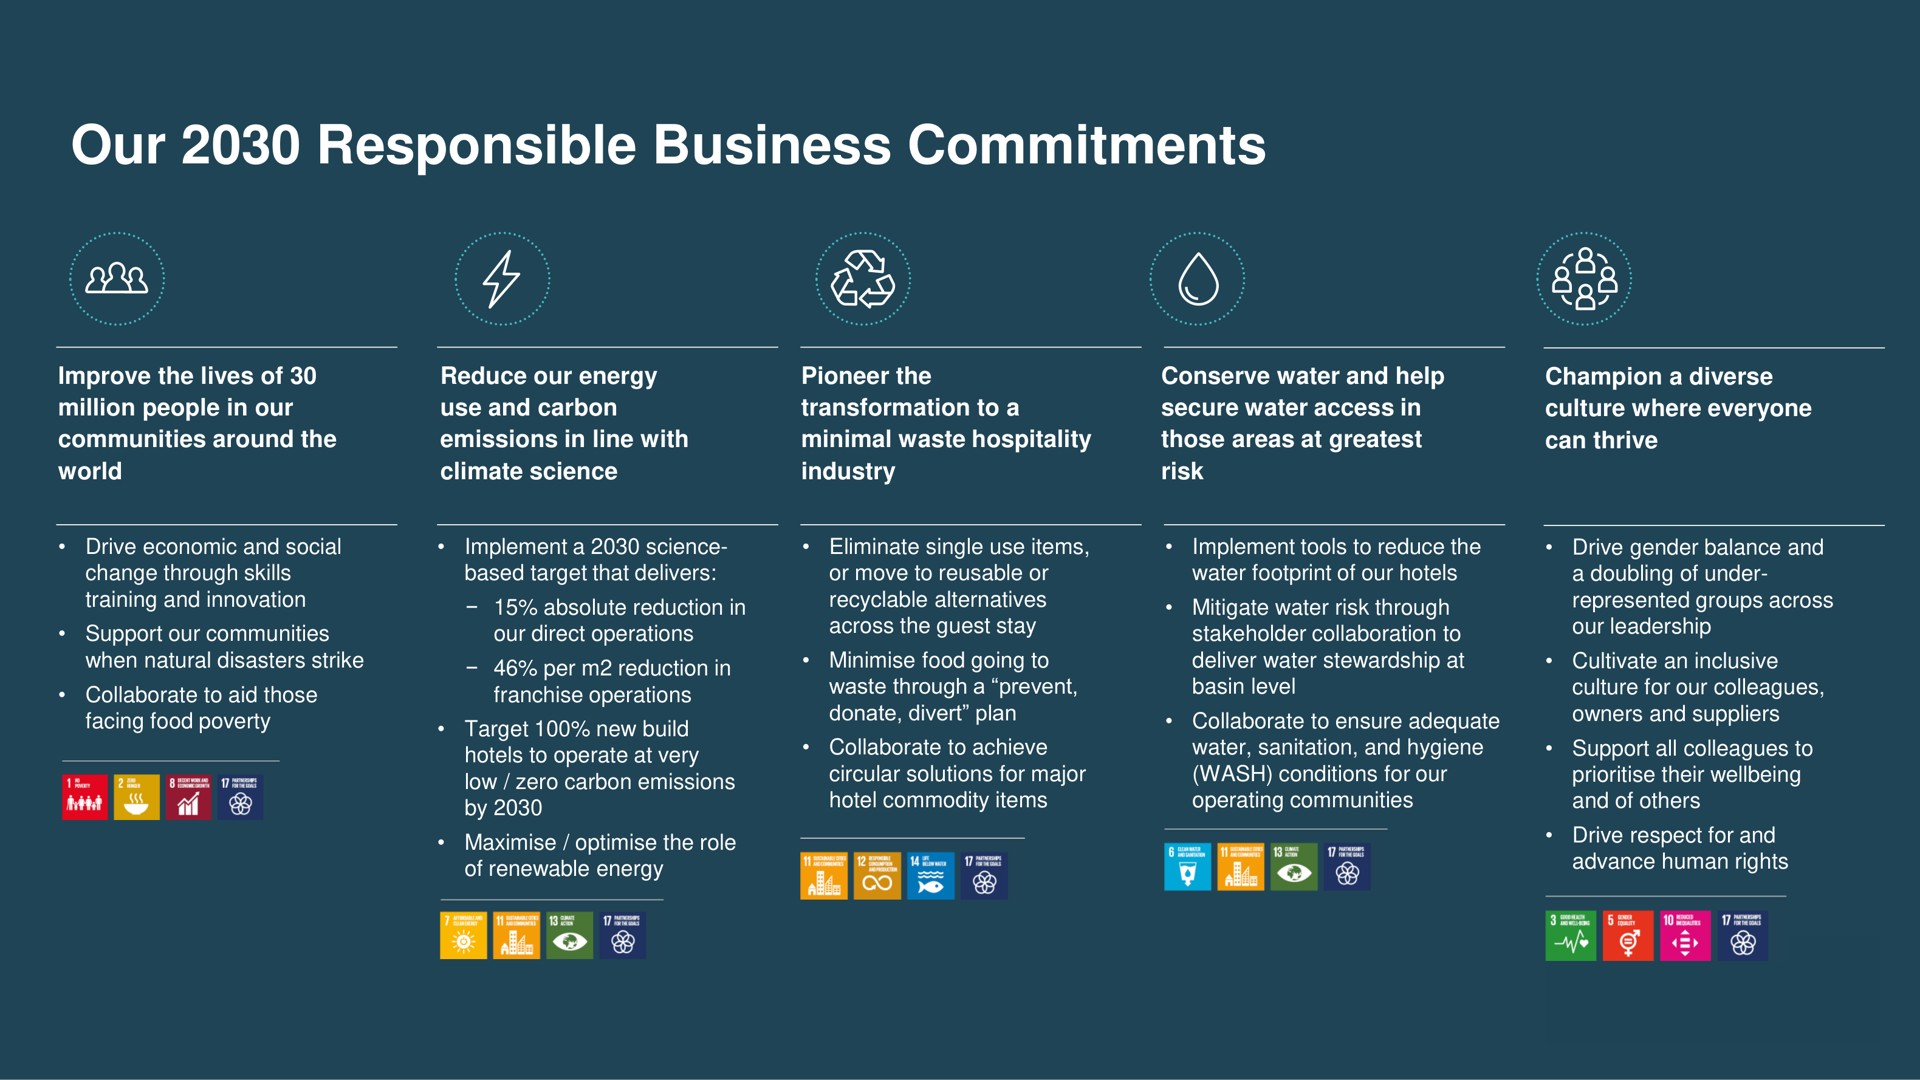 our responsible business commitments tes | IHG Hotels